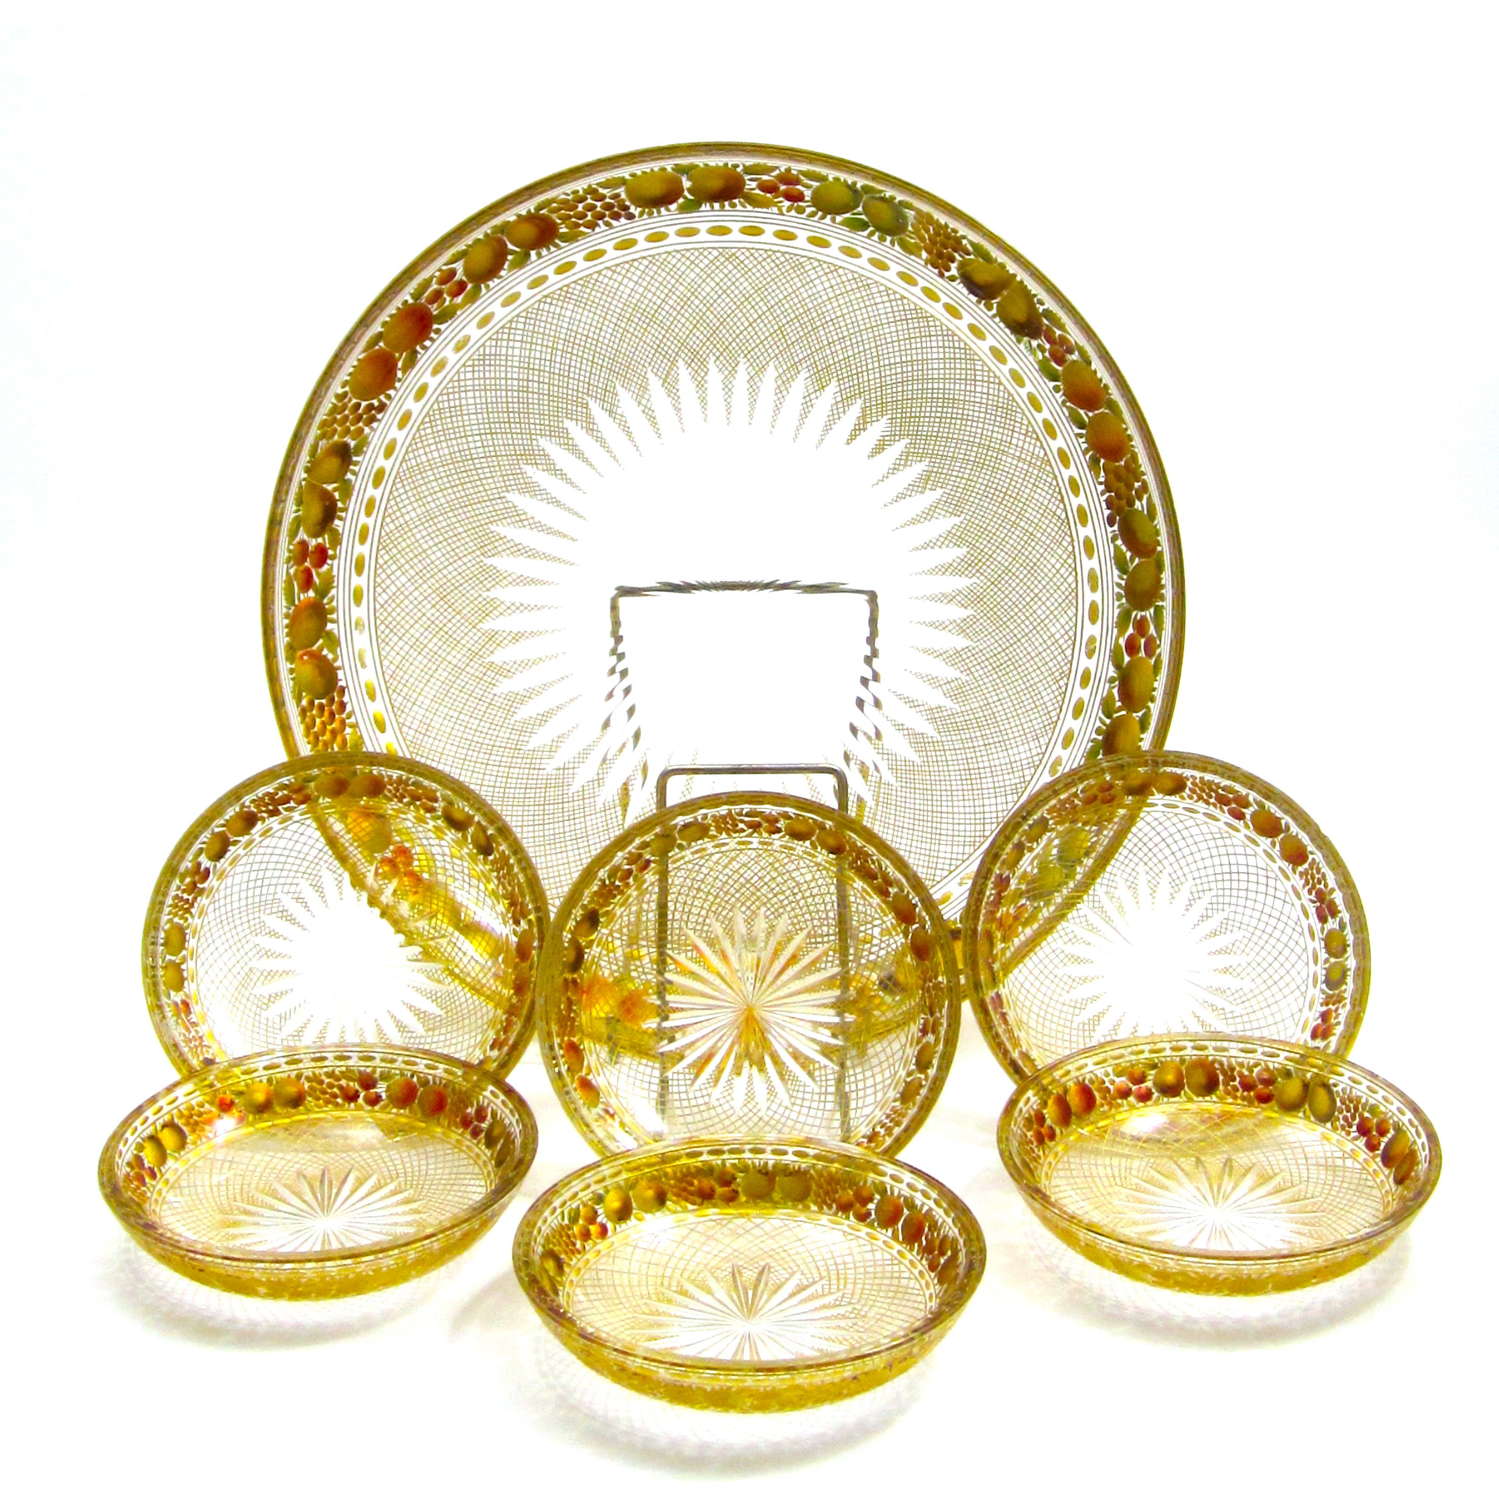 High Quality Antique MOSER Glass Enamelled Set of Plates